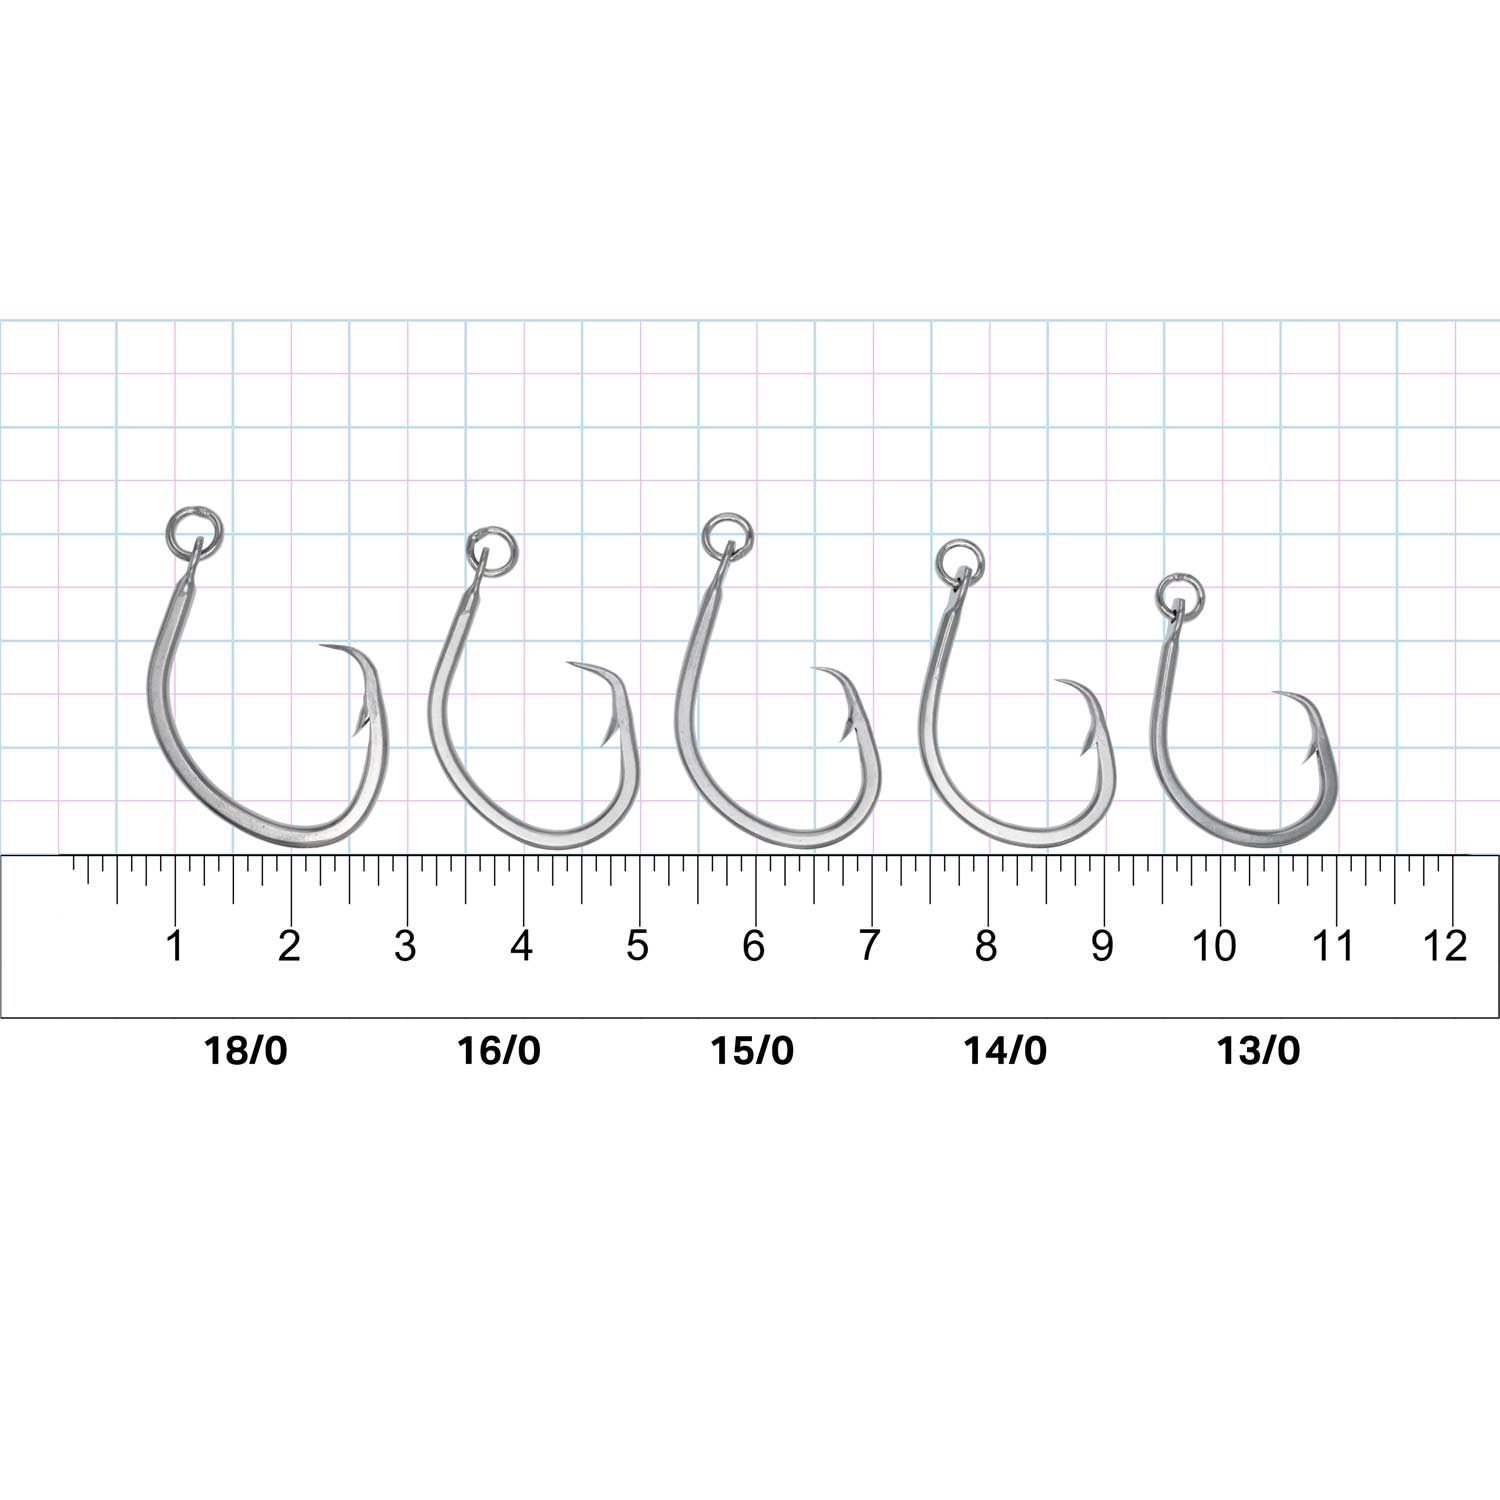 Rite Angler Inline Circle Hook Saltwater Freshwater Offshore Inshore  Fishing Live Bait #1, 2, 1/0, 2/0, 3/0, 4/0, 5/0 Hook Sizes (100 Pack)